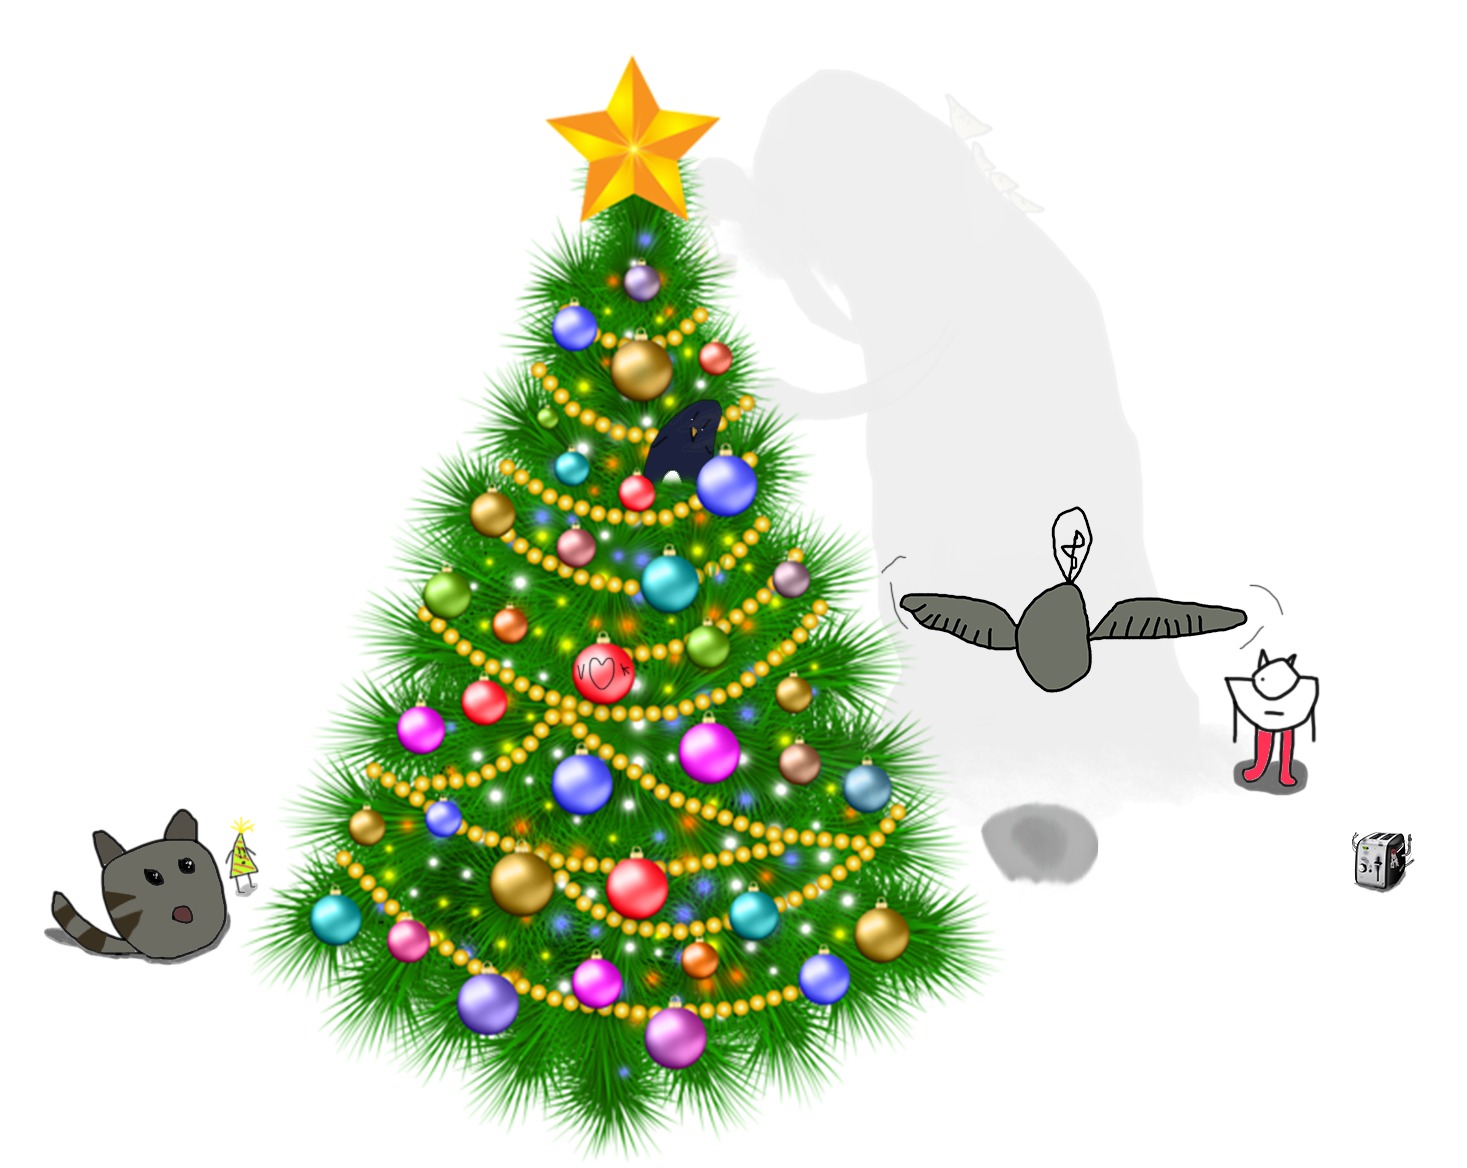 My OCs in a Christmas tree | image tagged in oc,christmas | made w/ Imgflip meme maker